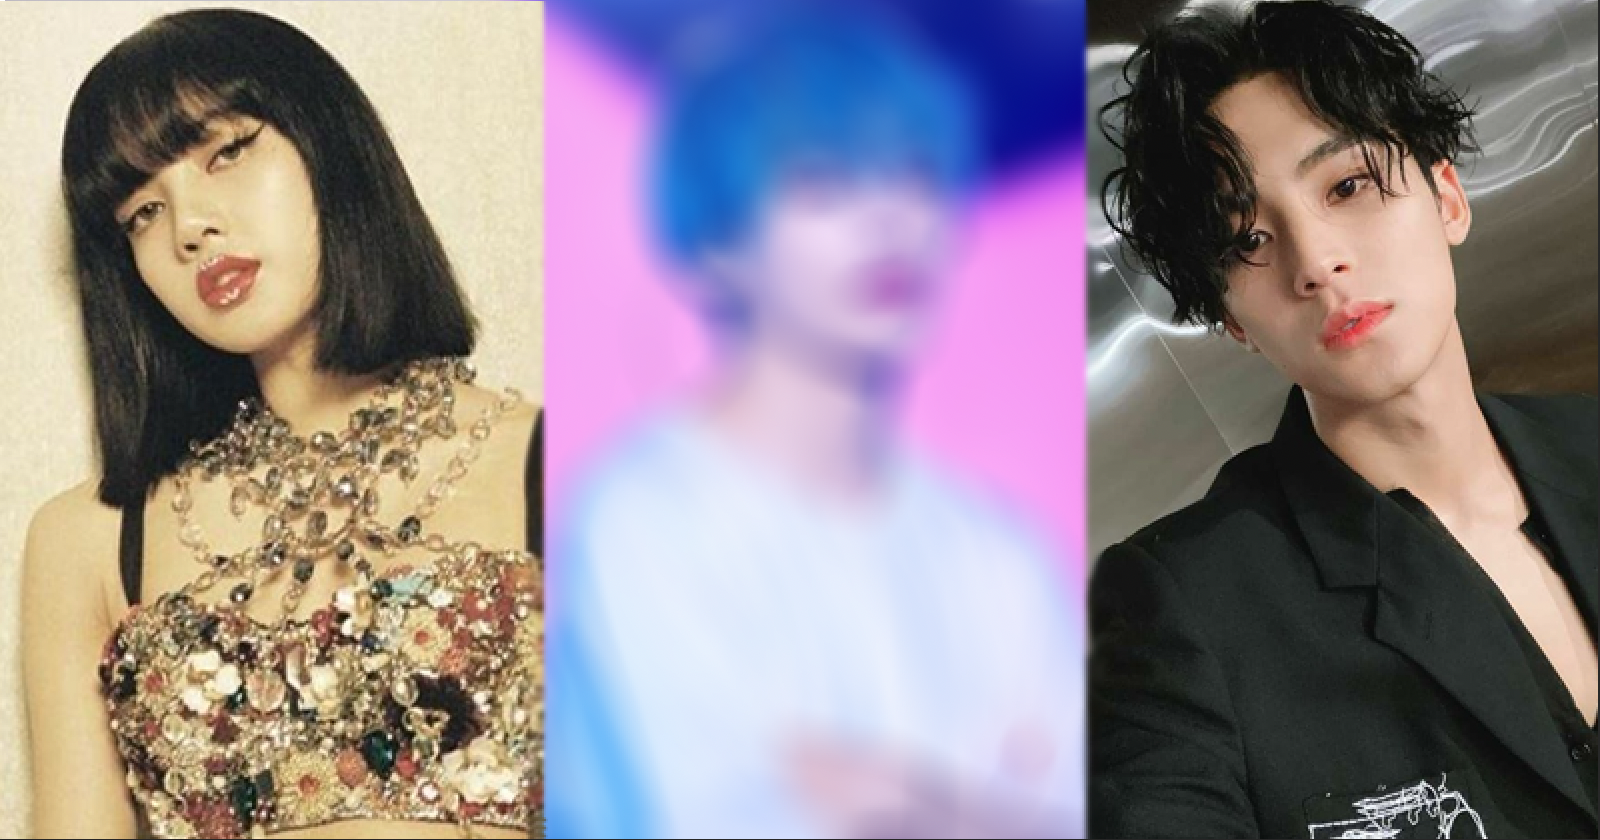 Influencers Want To Have  A Collaboration With These K-Pop Stars Most